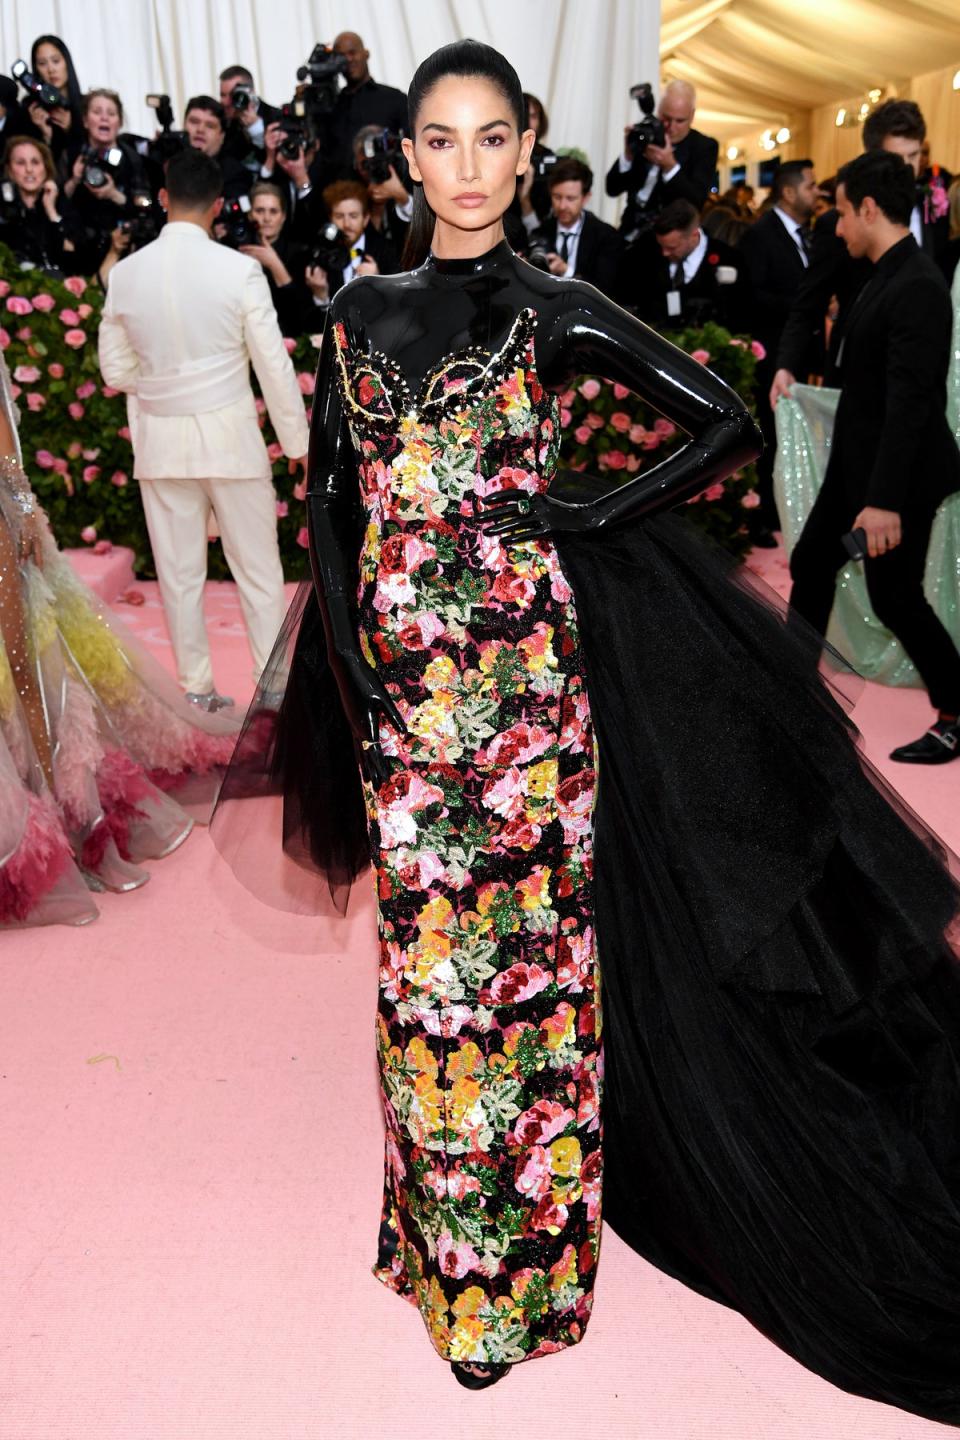 Lily Aldridge wearing Richard Quinn at the 2019 Met Gala (Getty Images for The Met Museum)